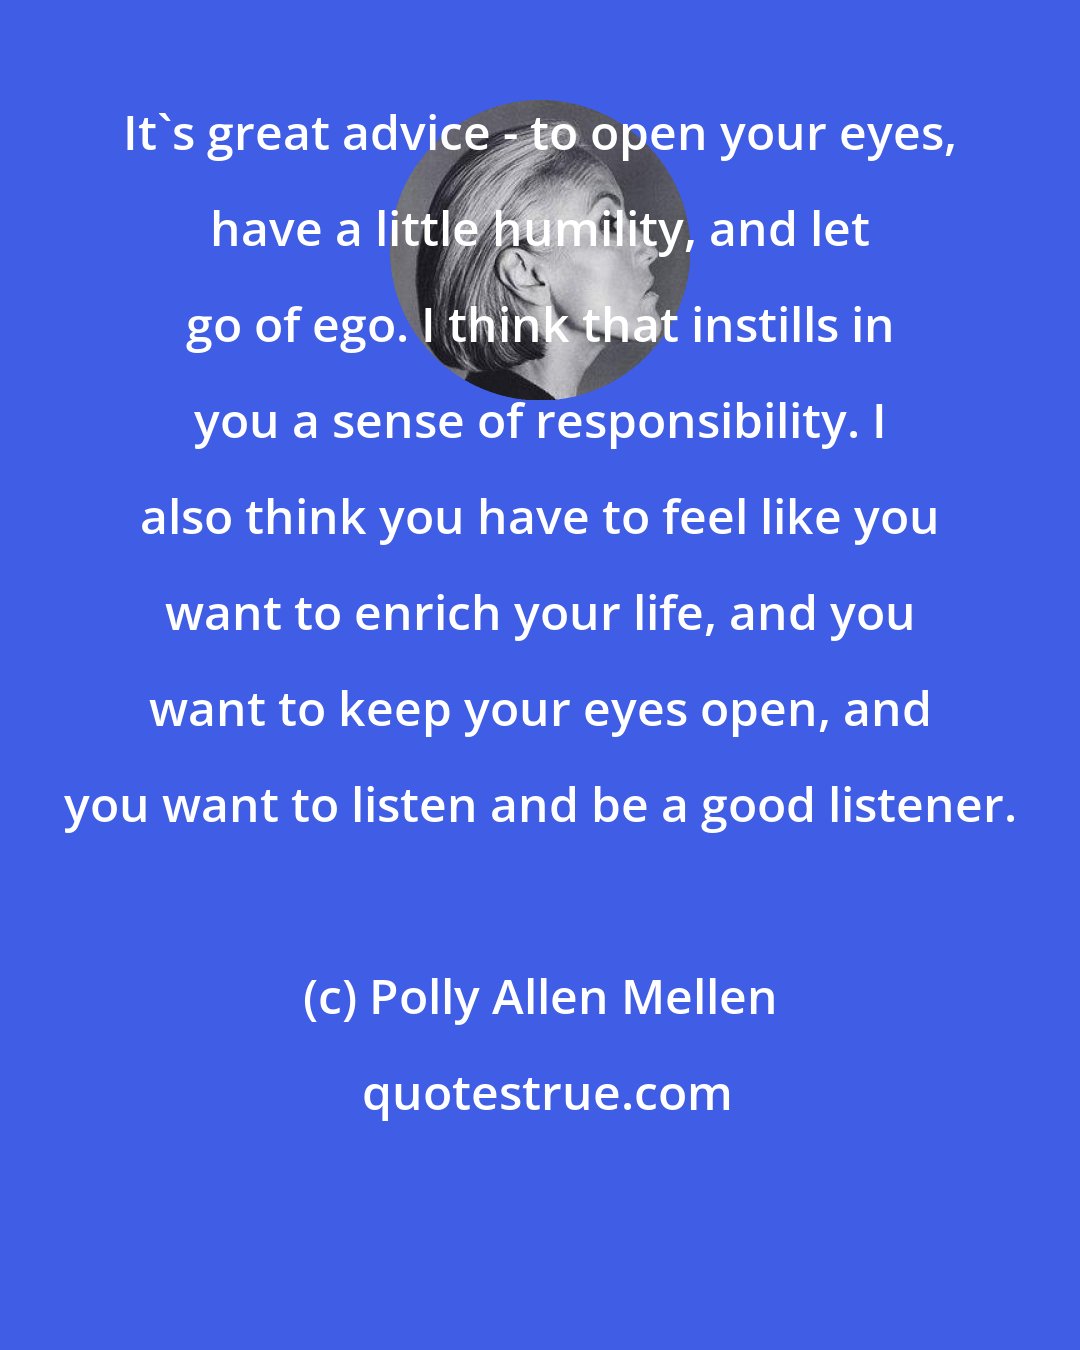 Polly Allen Mellen: It's great advice - to open your eyes, have a little humility, and let go of ego. I think that instills in you a sense of responsibility. I also think you have to feel like you want to enrich your life, and you want to keep your eyes open, and you want to listen and be a good listener.